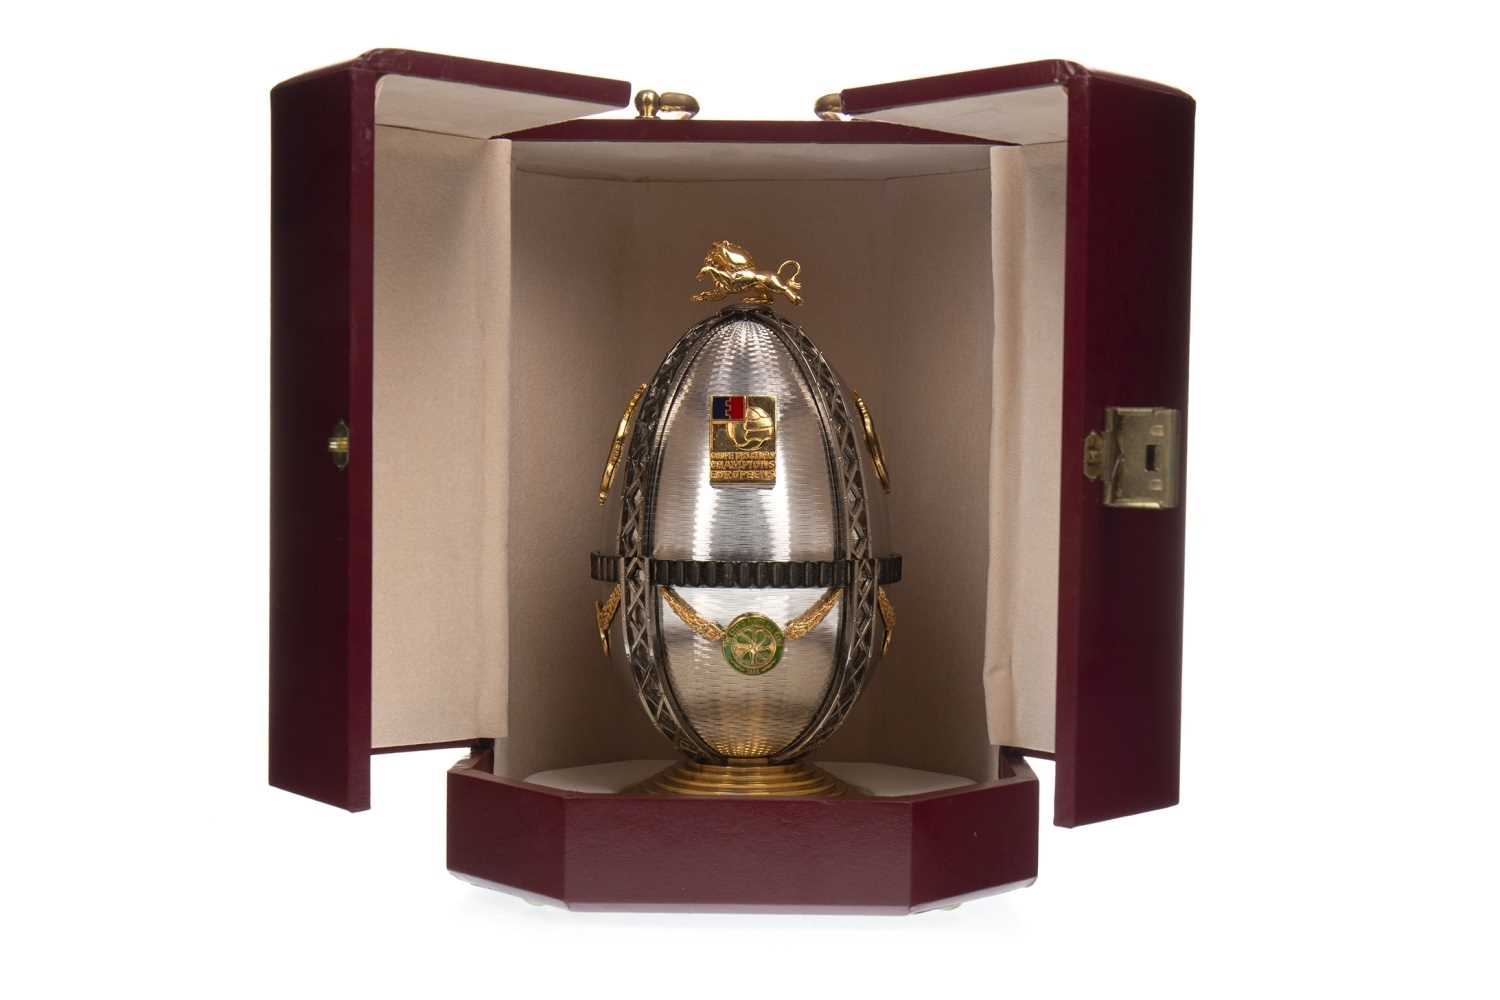 Lot 1915 - THE JIMMY JOHNSTONE FABERGE EGG BY SARAH FABERGE